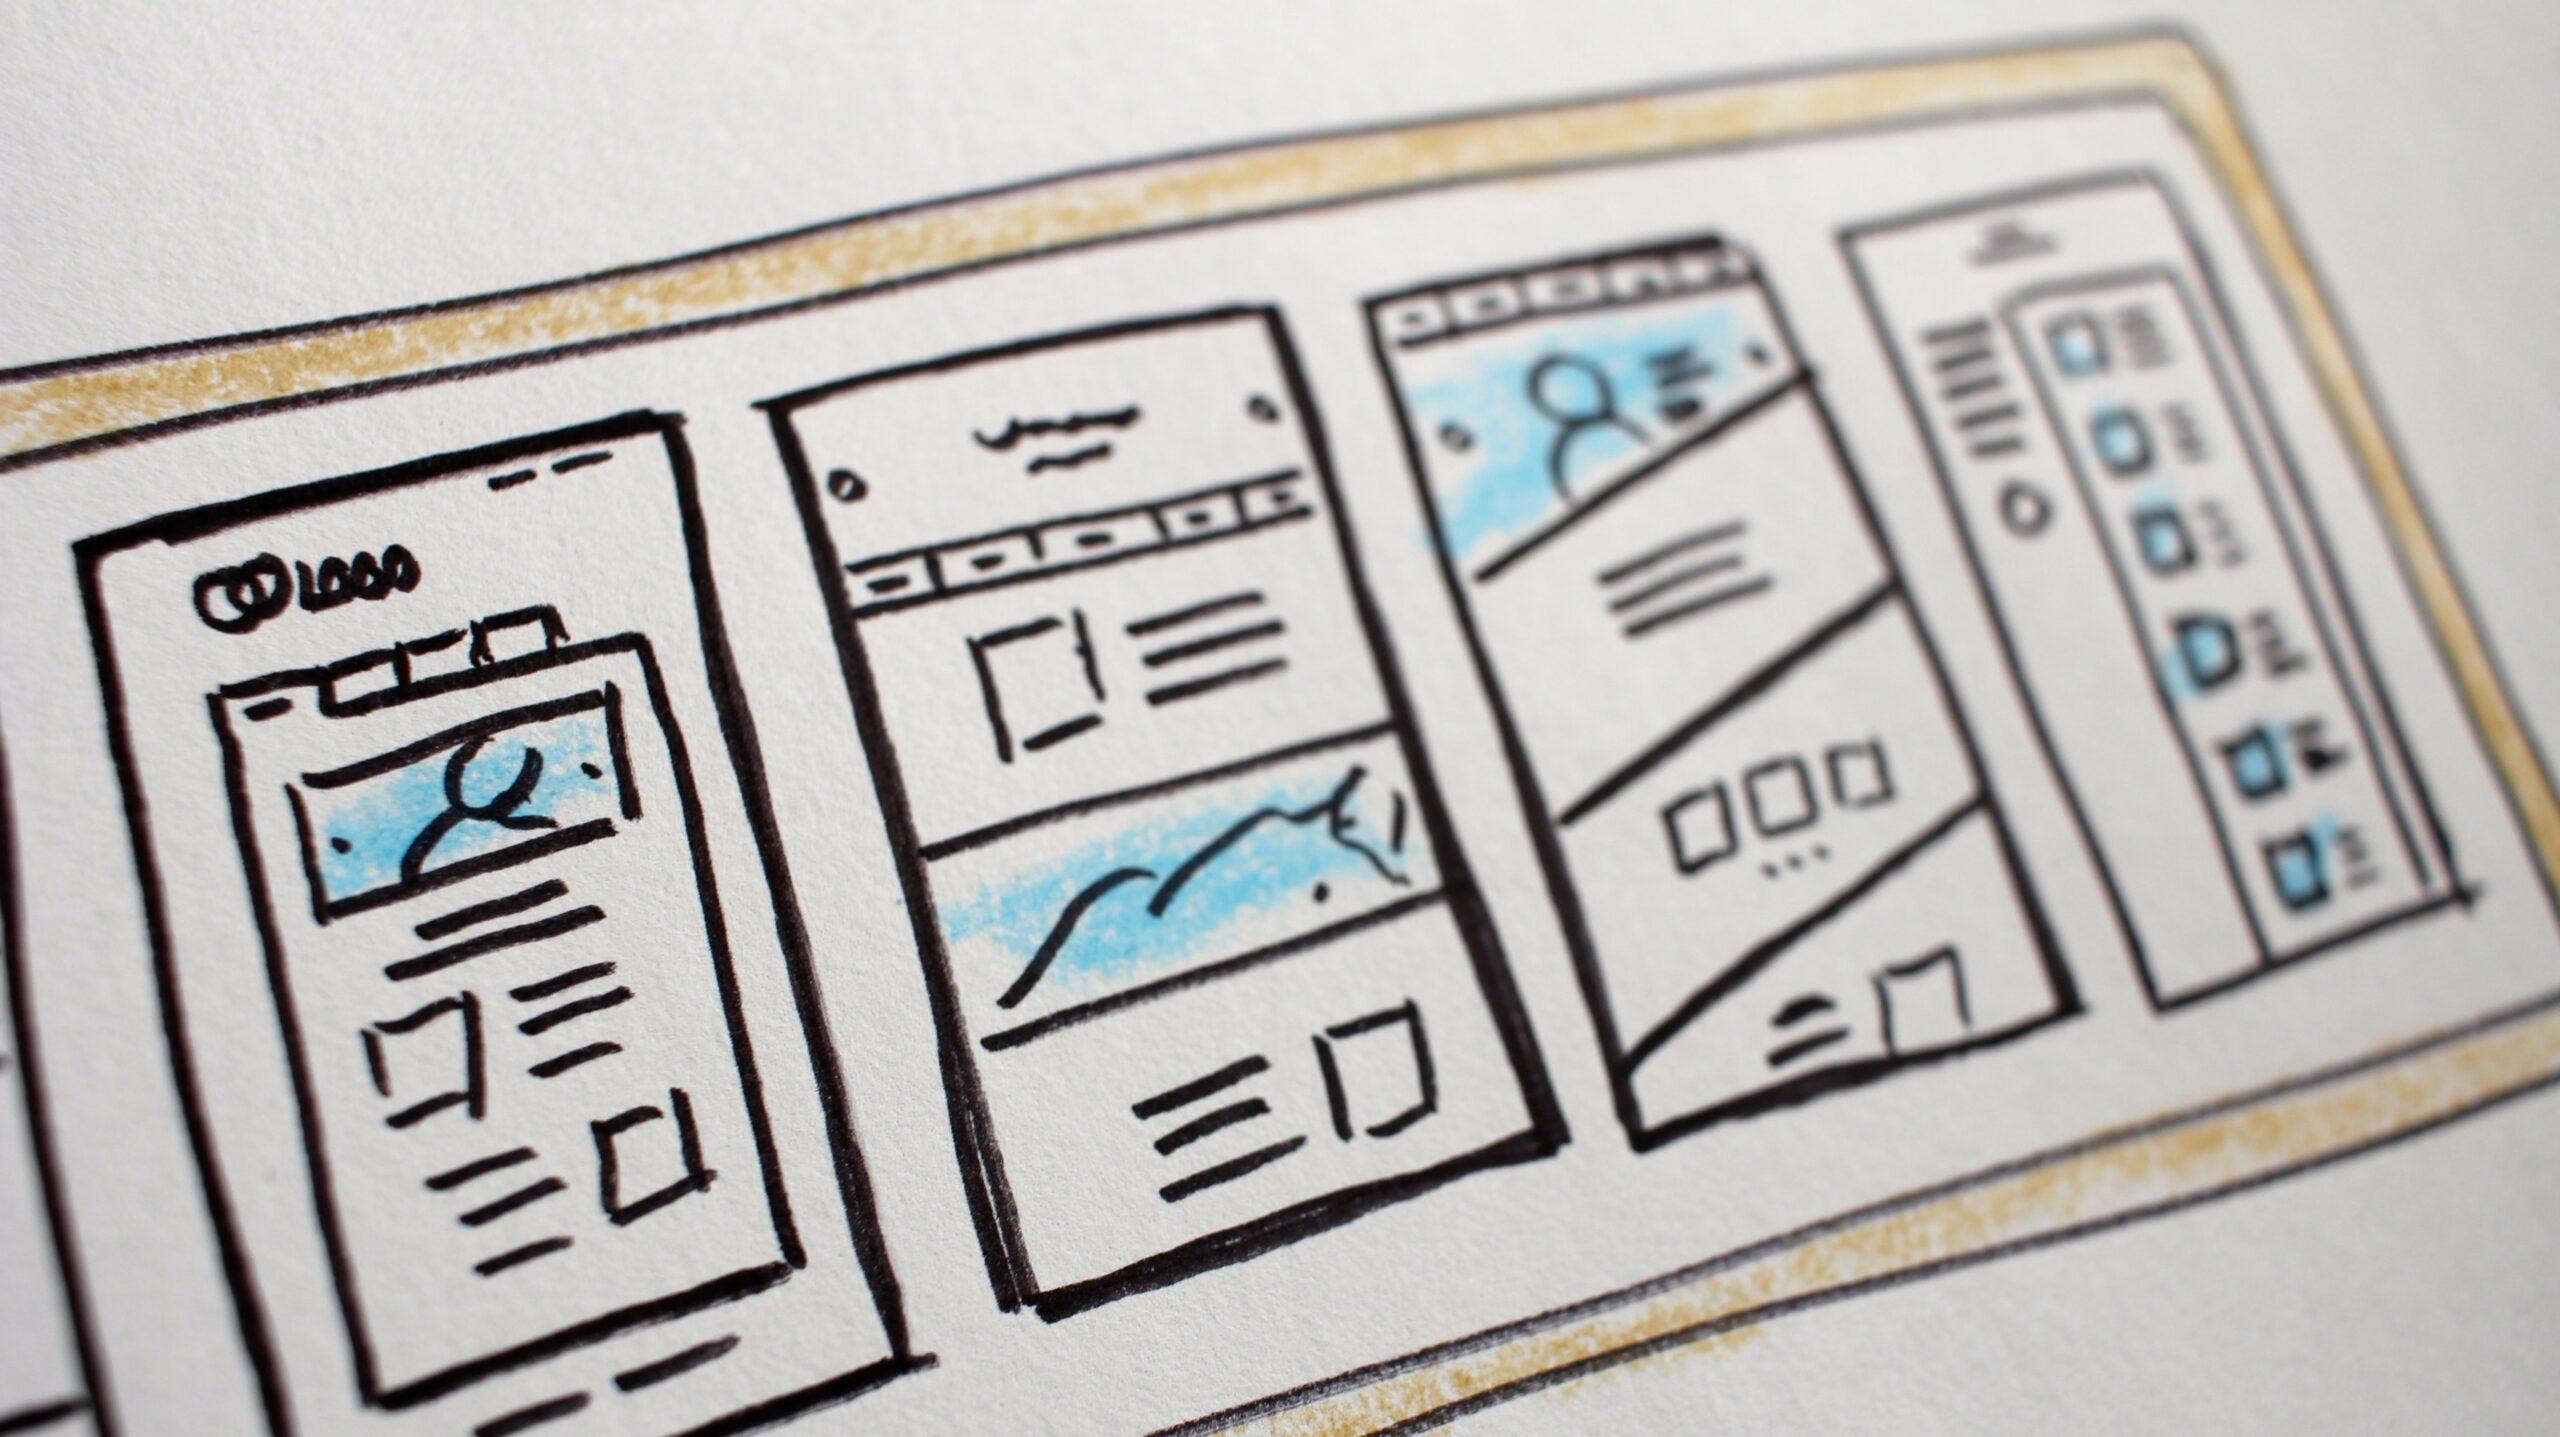 Part of a hand-drawn website wireframe.